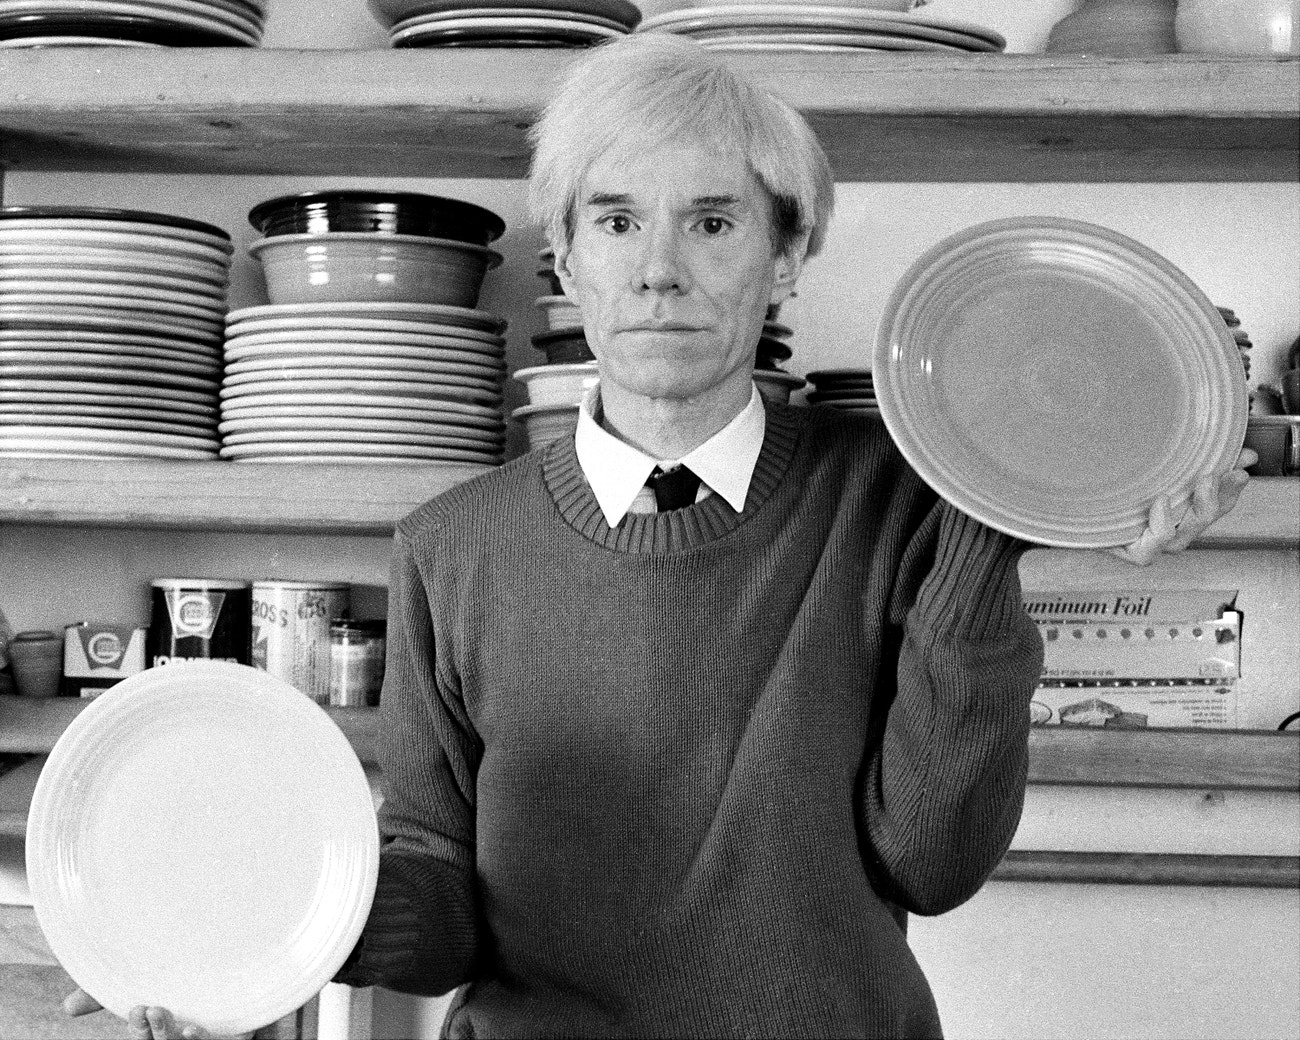 Andy Warhol
Autor: Ken Korotkin/NY Daily News Archive via Getty Images